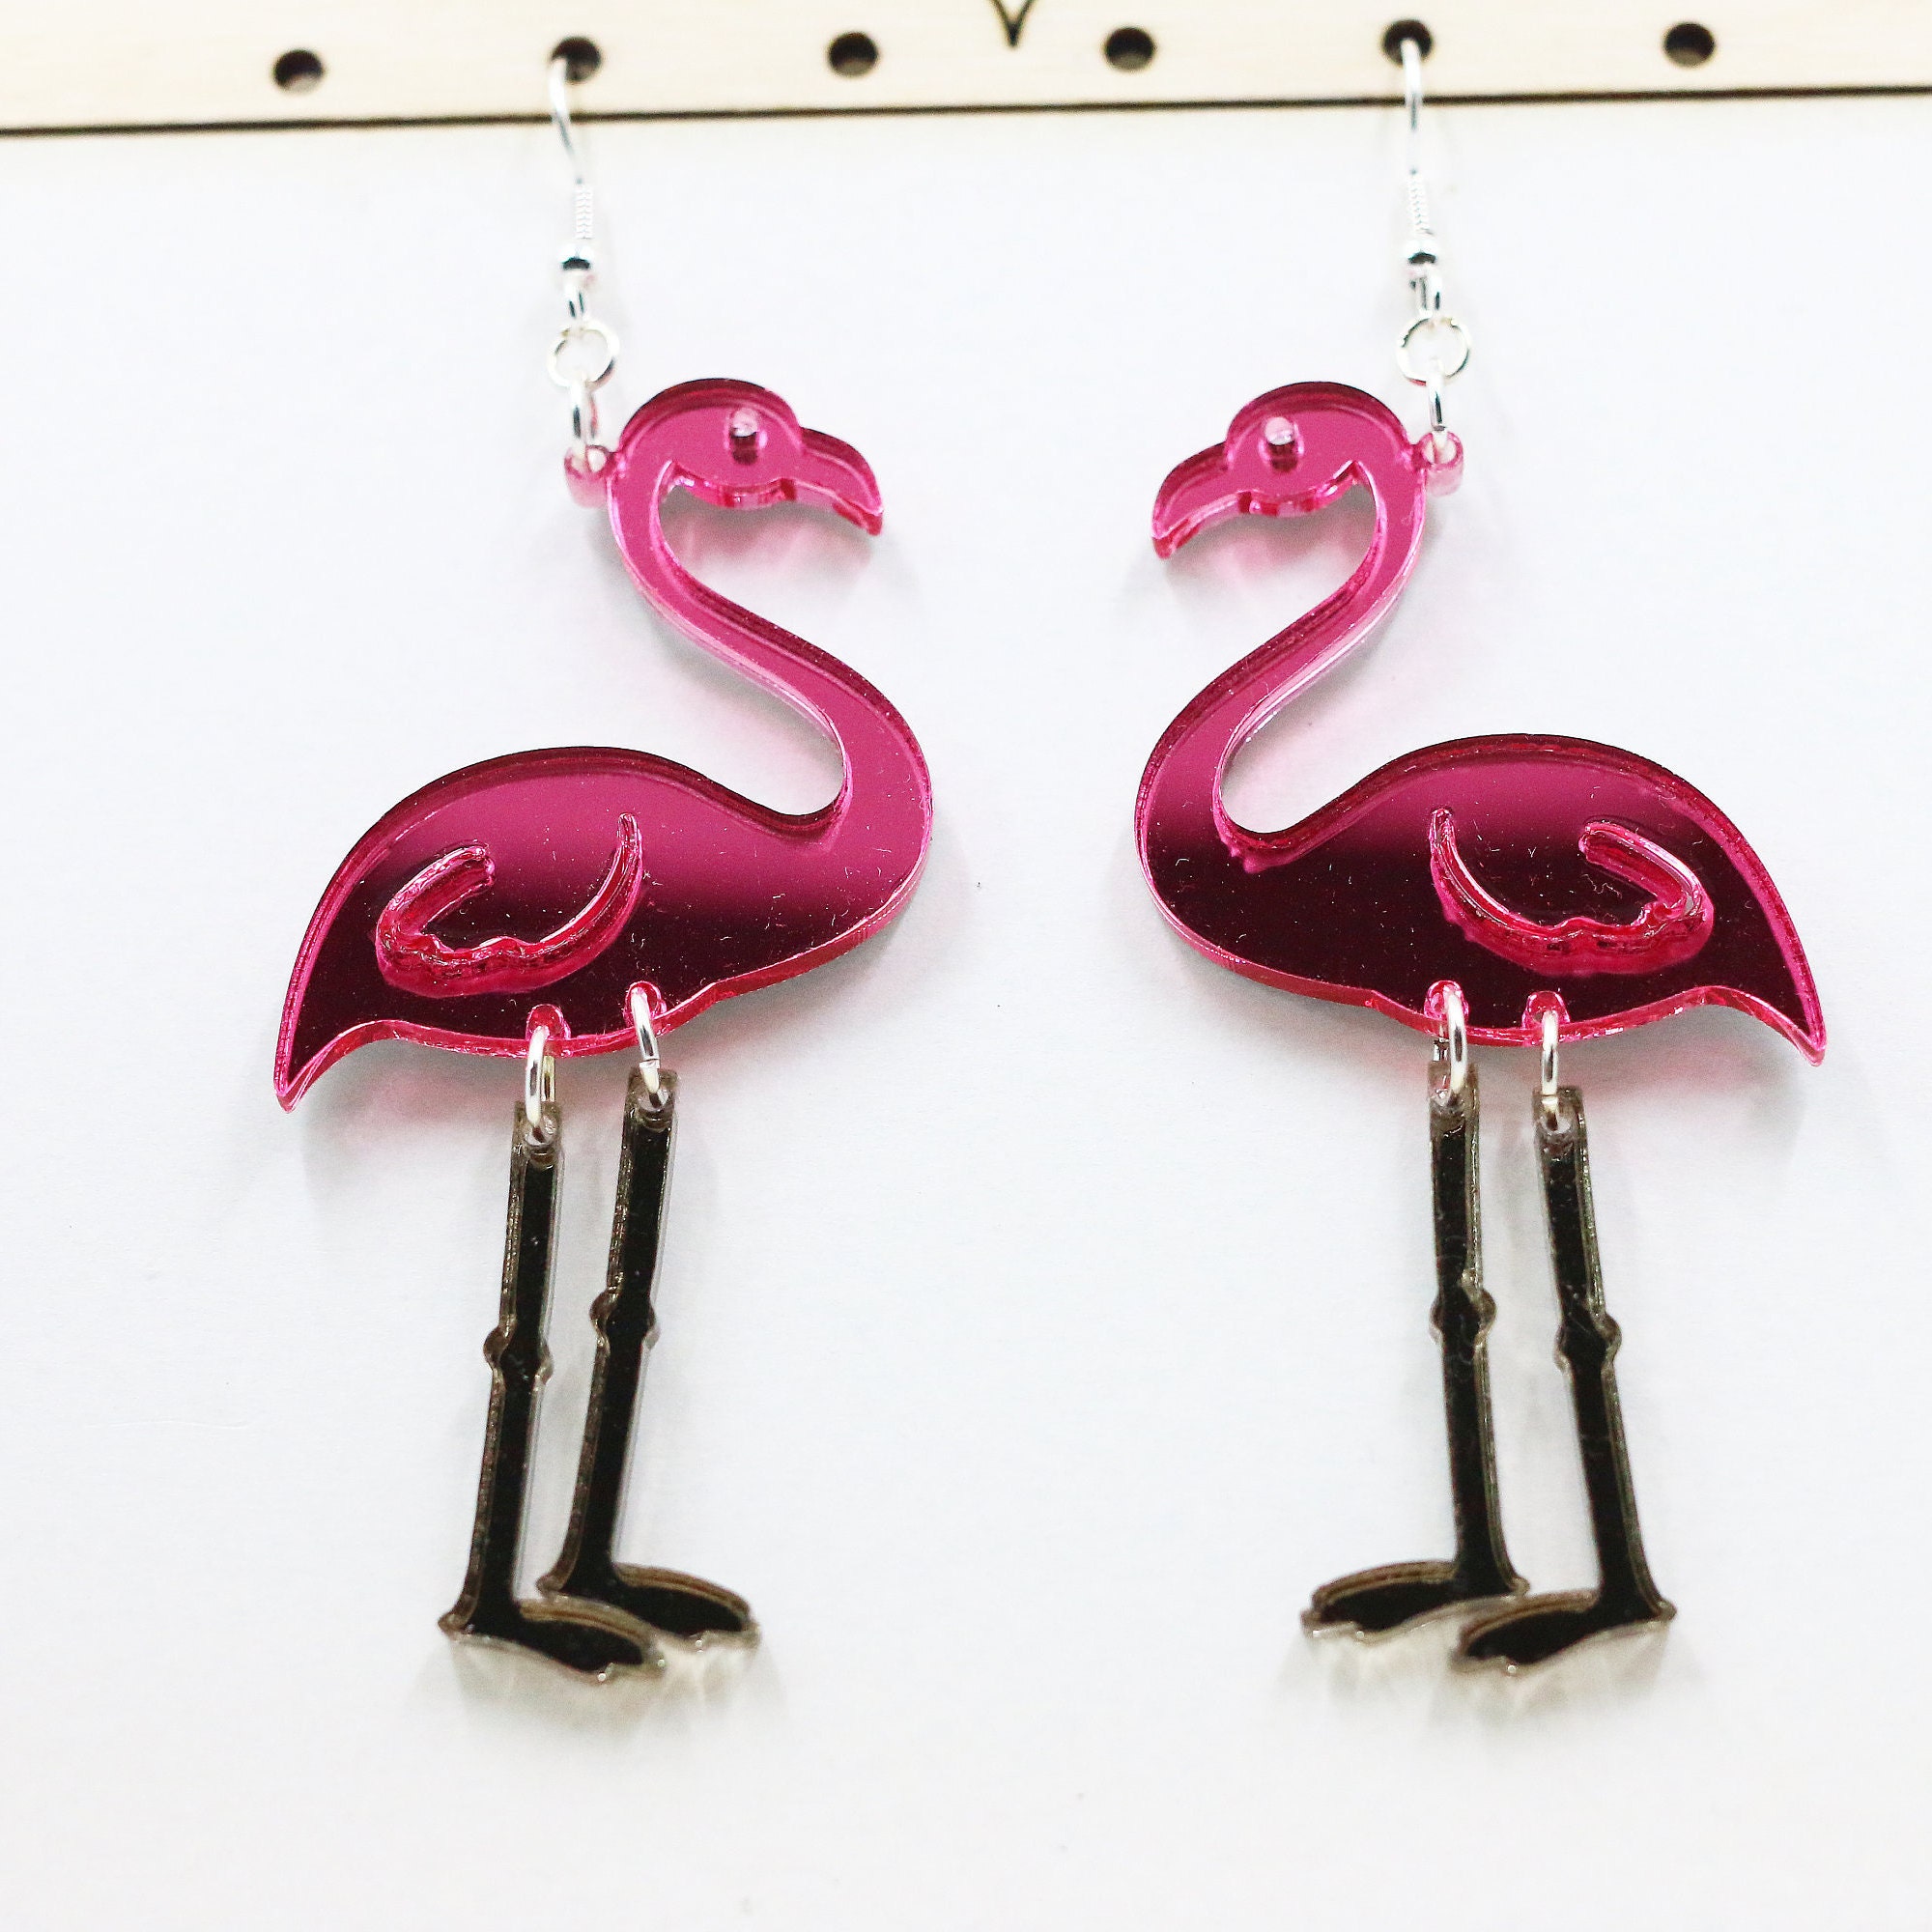 Pink Flamingo Statement Acrylic Earrings with Dangling Legs | Etsy